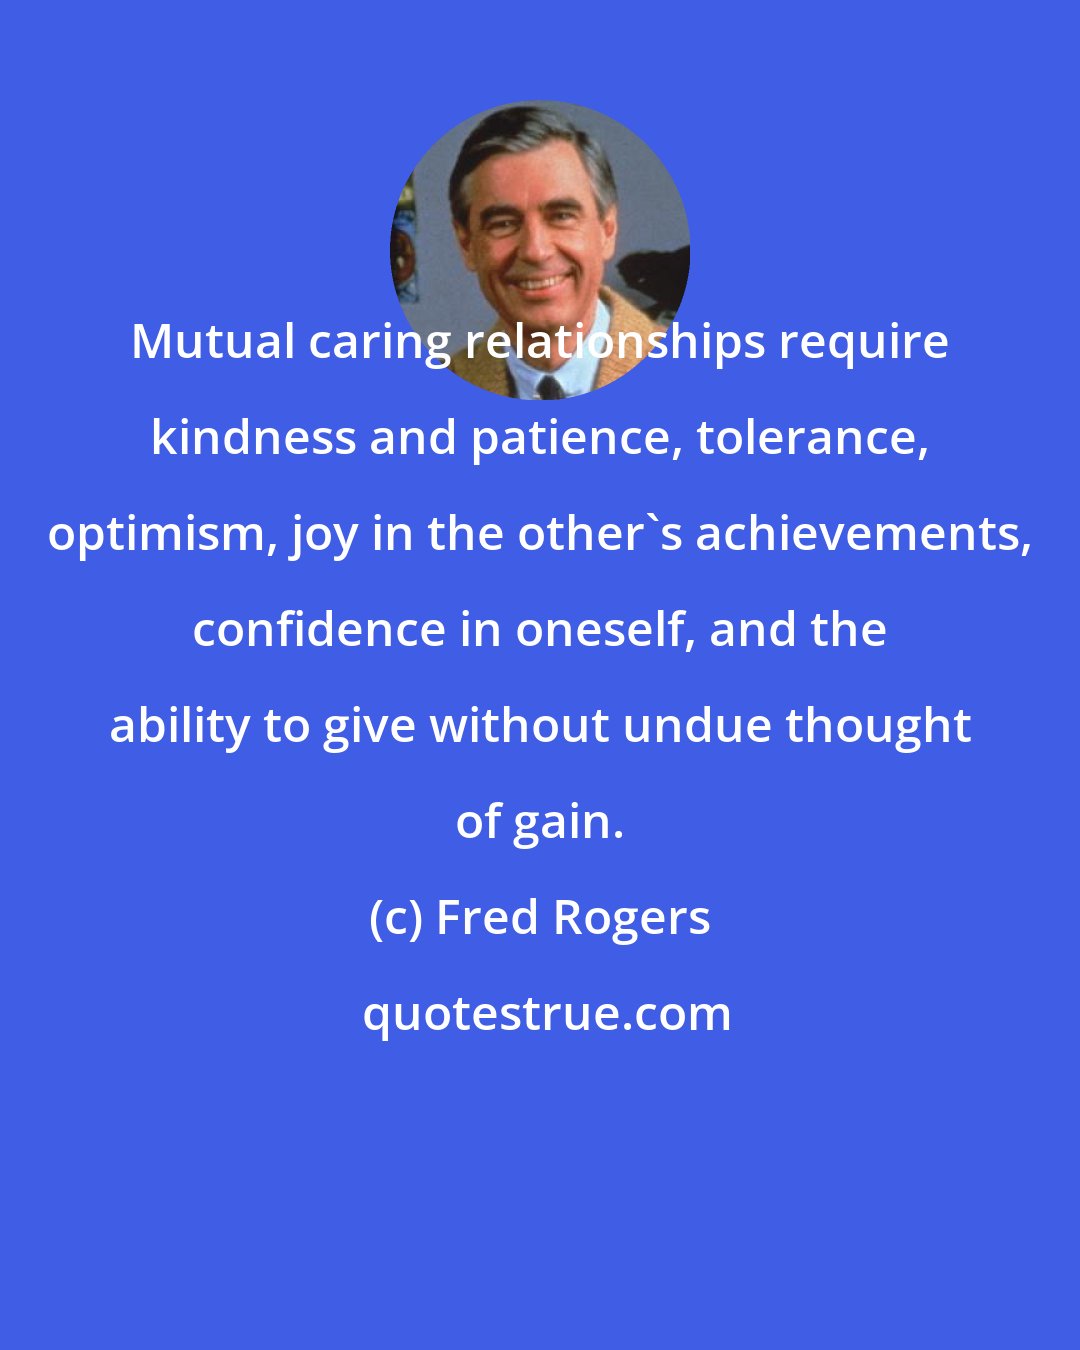 Fred Rogers: Mutual caring relationships require kindness and patience, tolerance, optimism, joy in the other's achievements, confidence in oneself, and the ability to give without undue thought of gain.